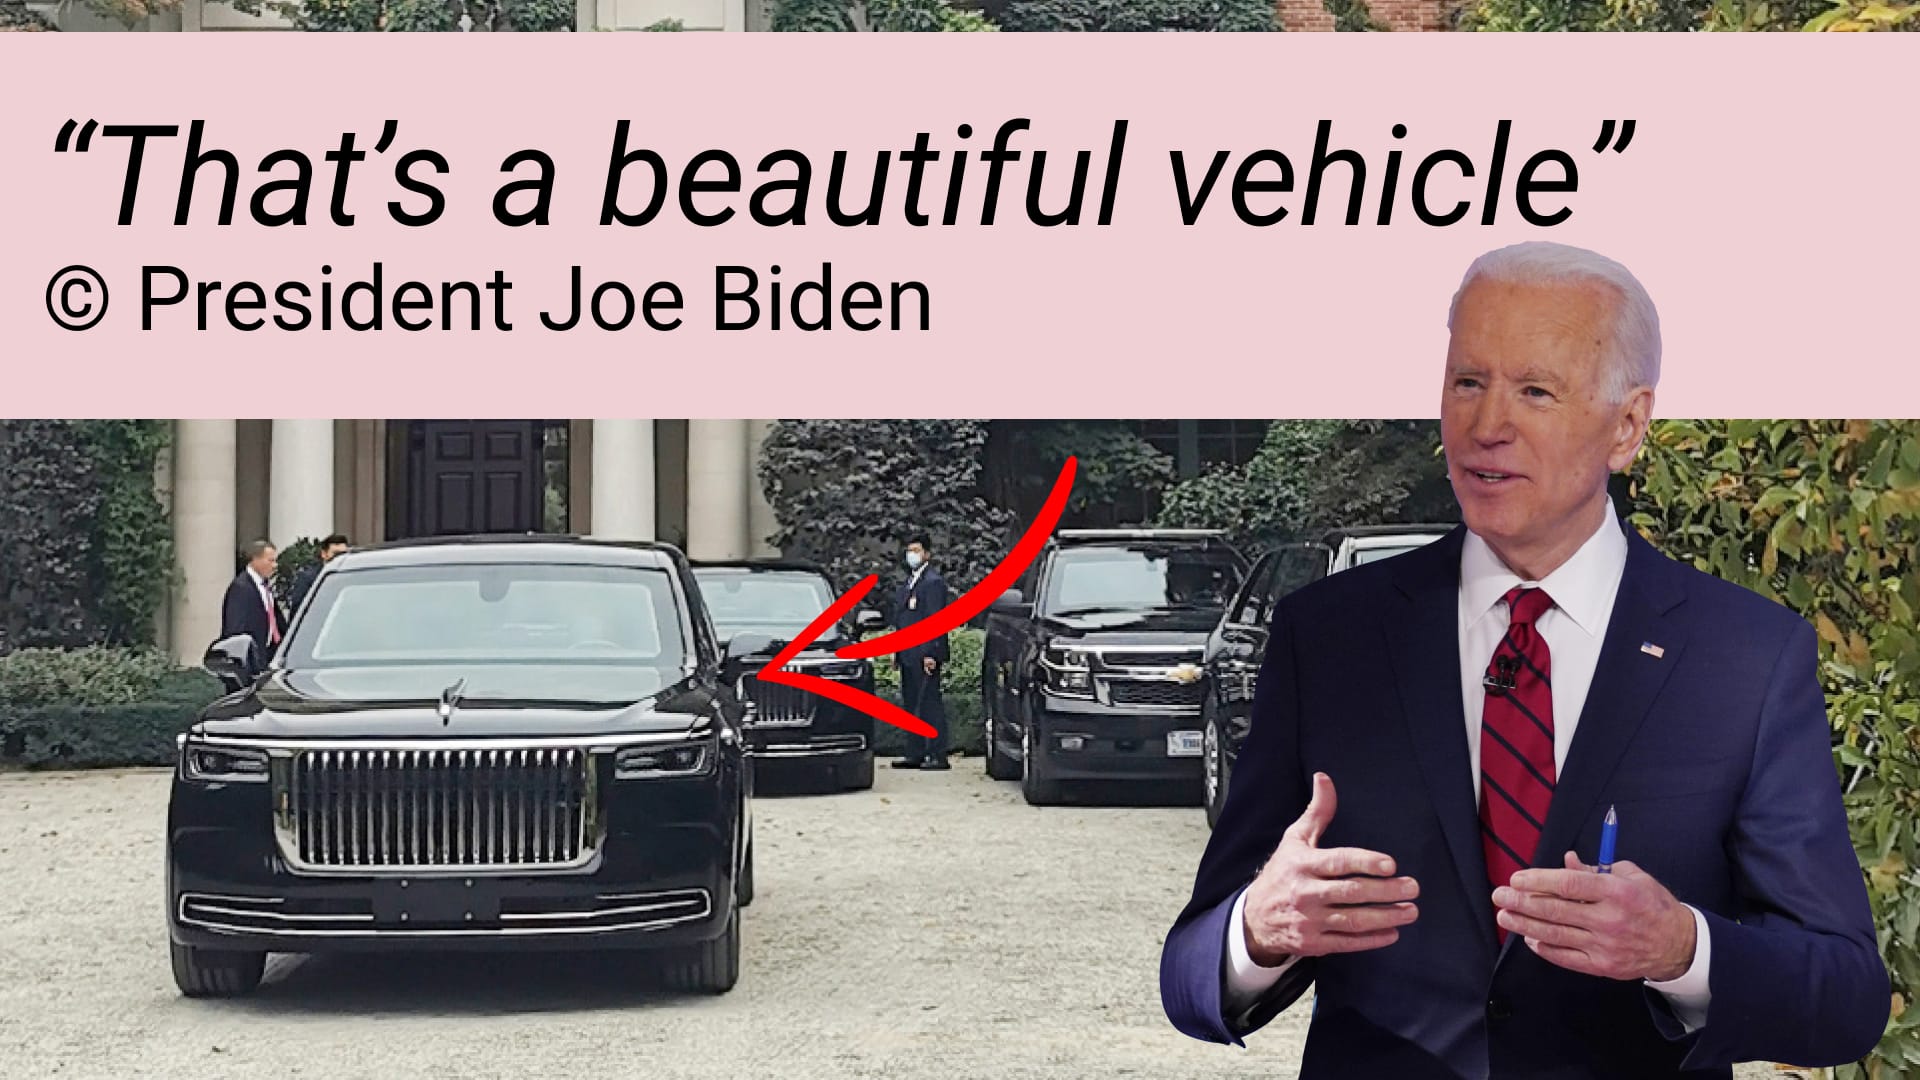 What is the car President Biden was so impressed by?